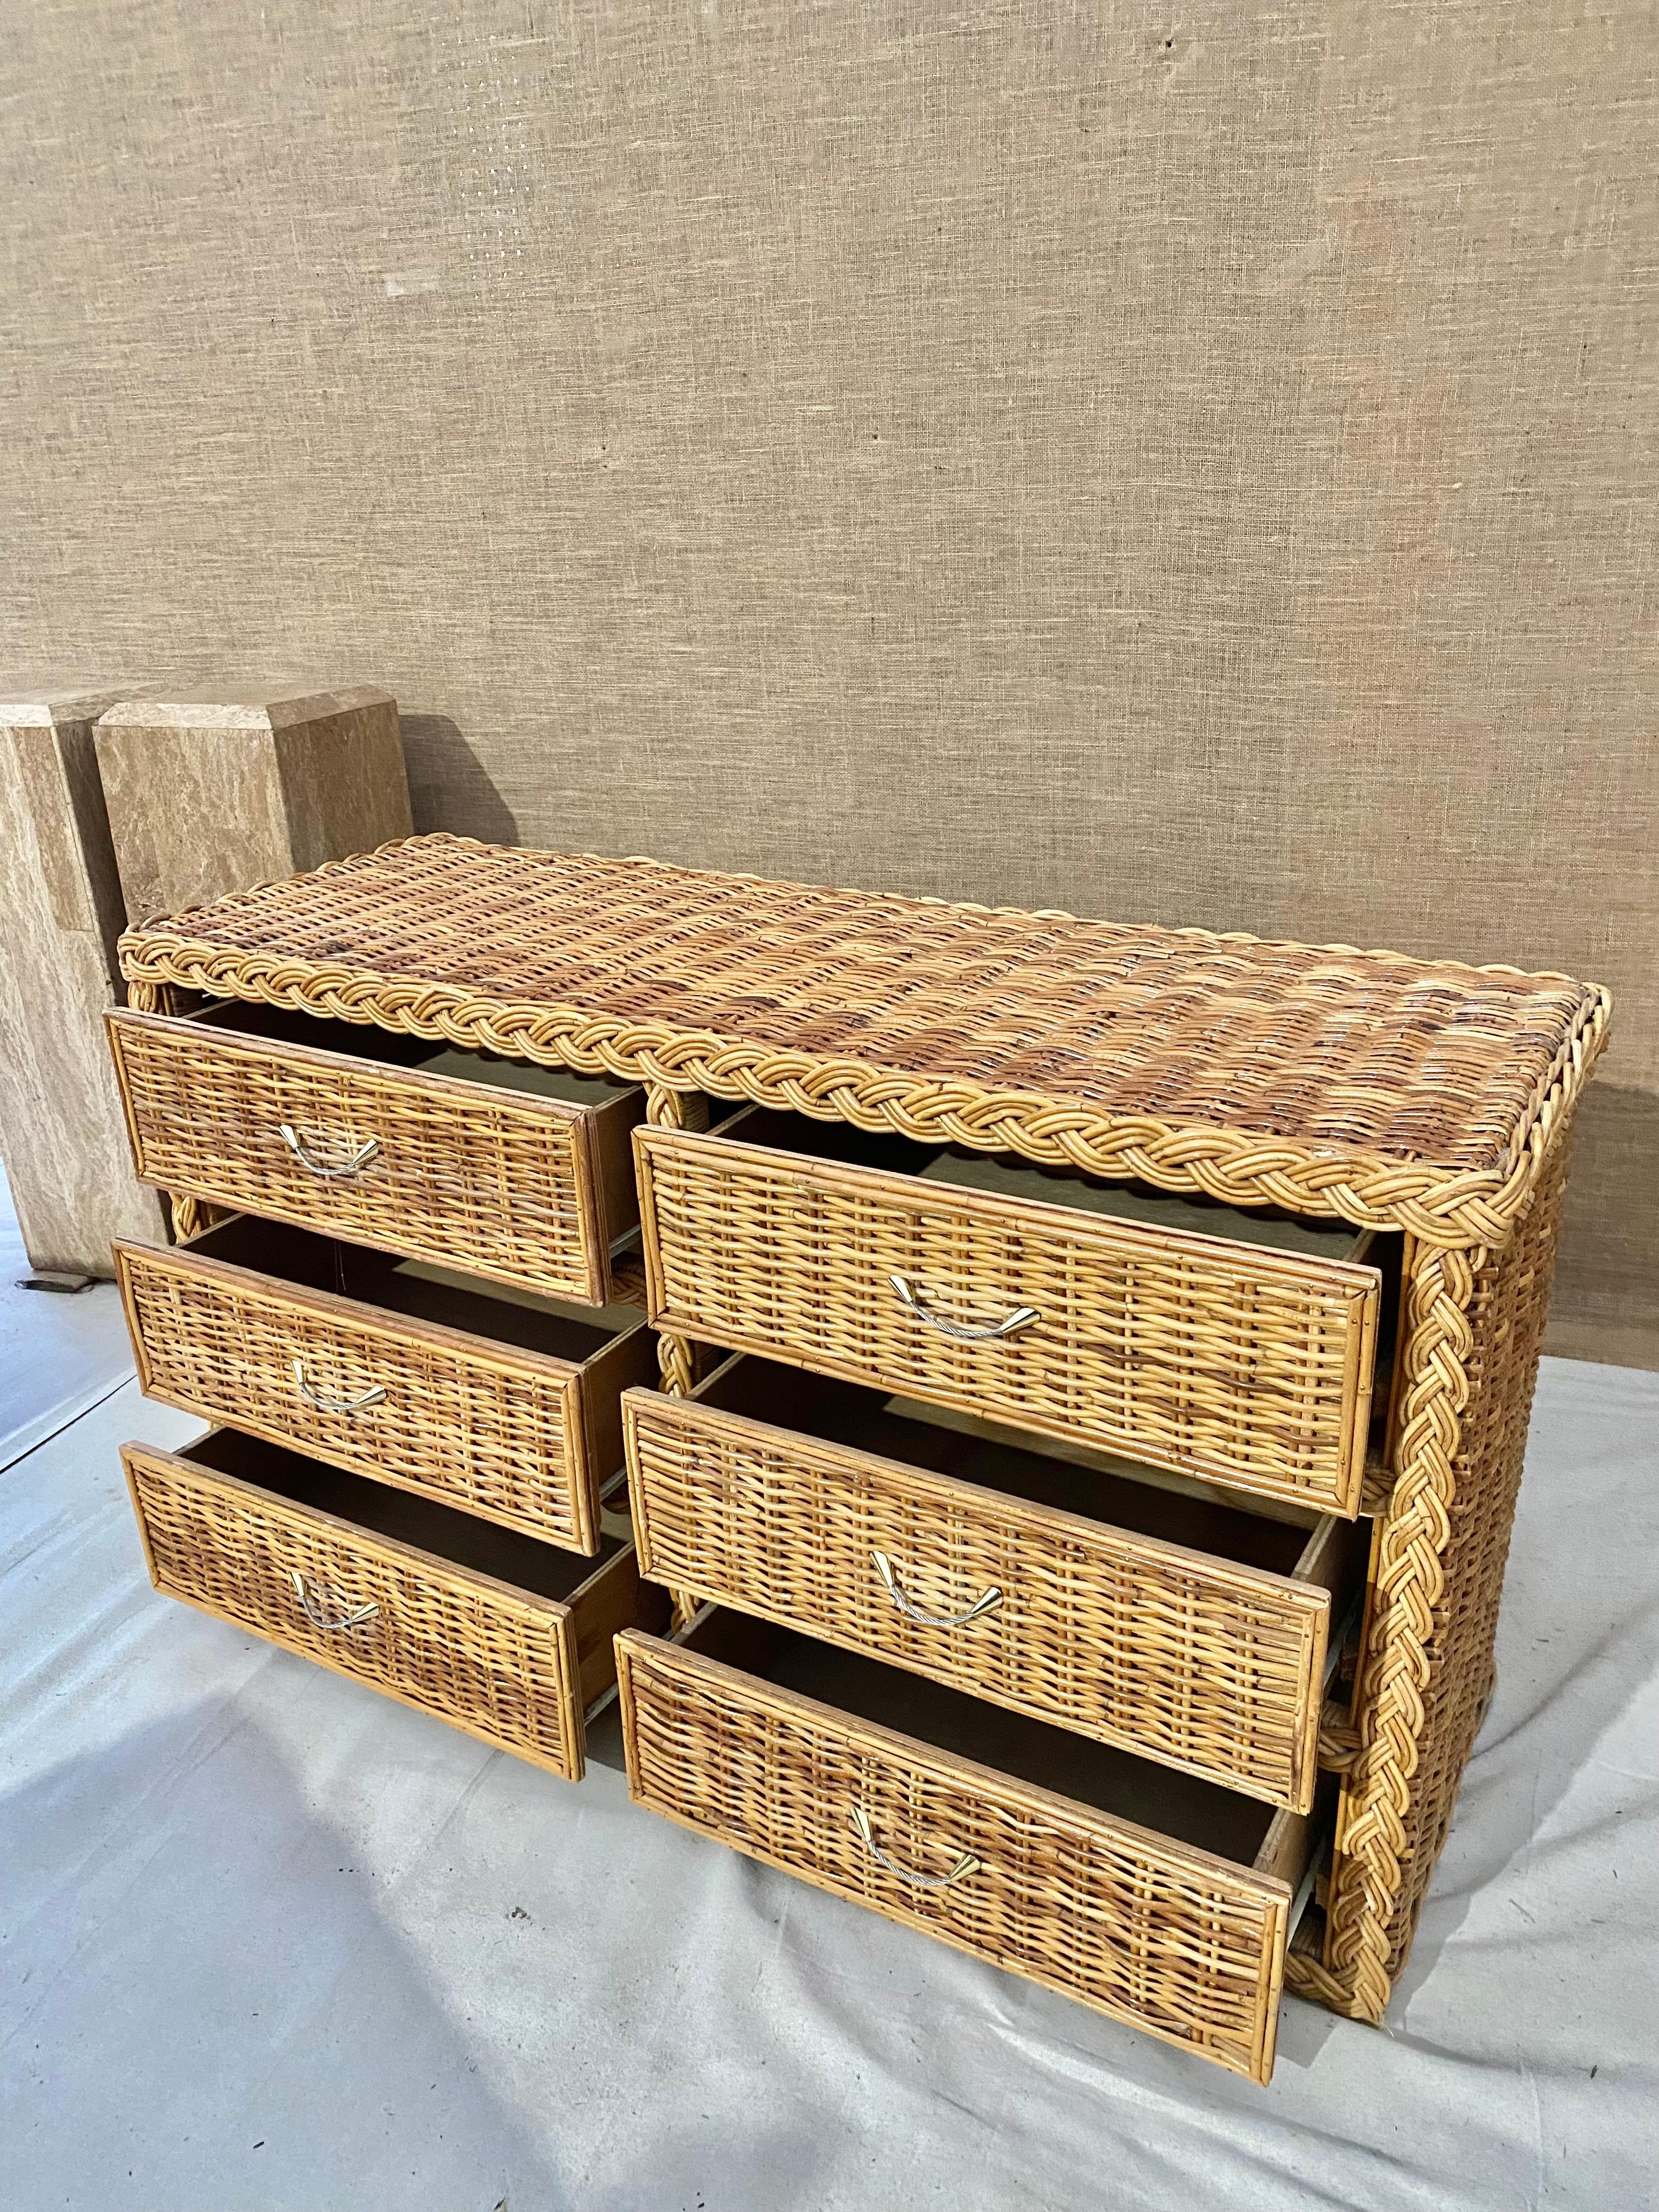 Braided Rattan 6 Drawer Dresser (After Bielecky Brothers) In Good Condition For Sale In Fort Collins, CO